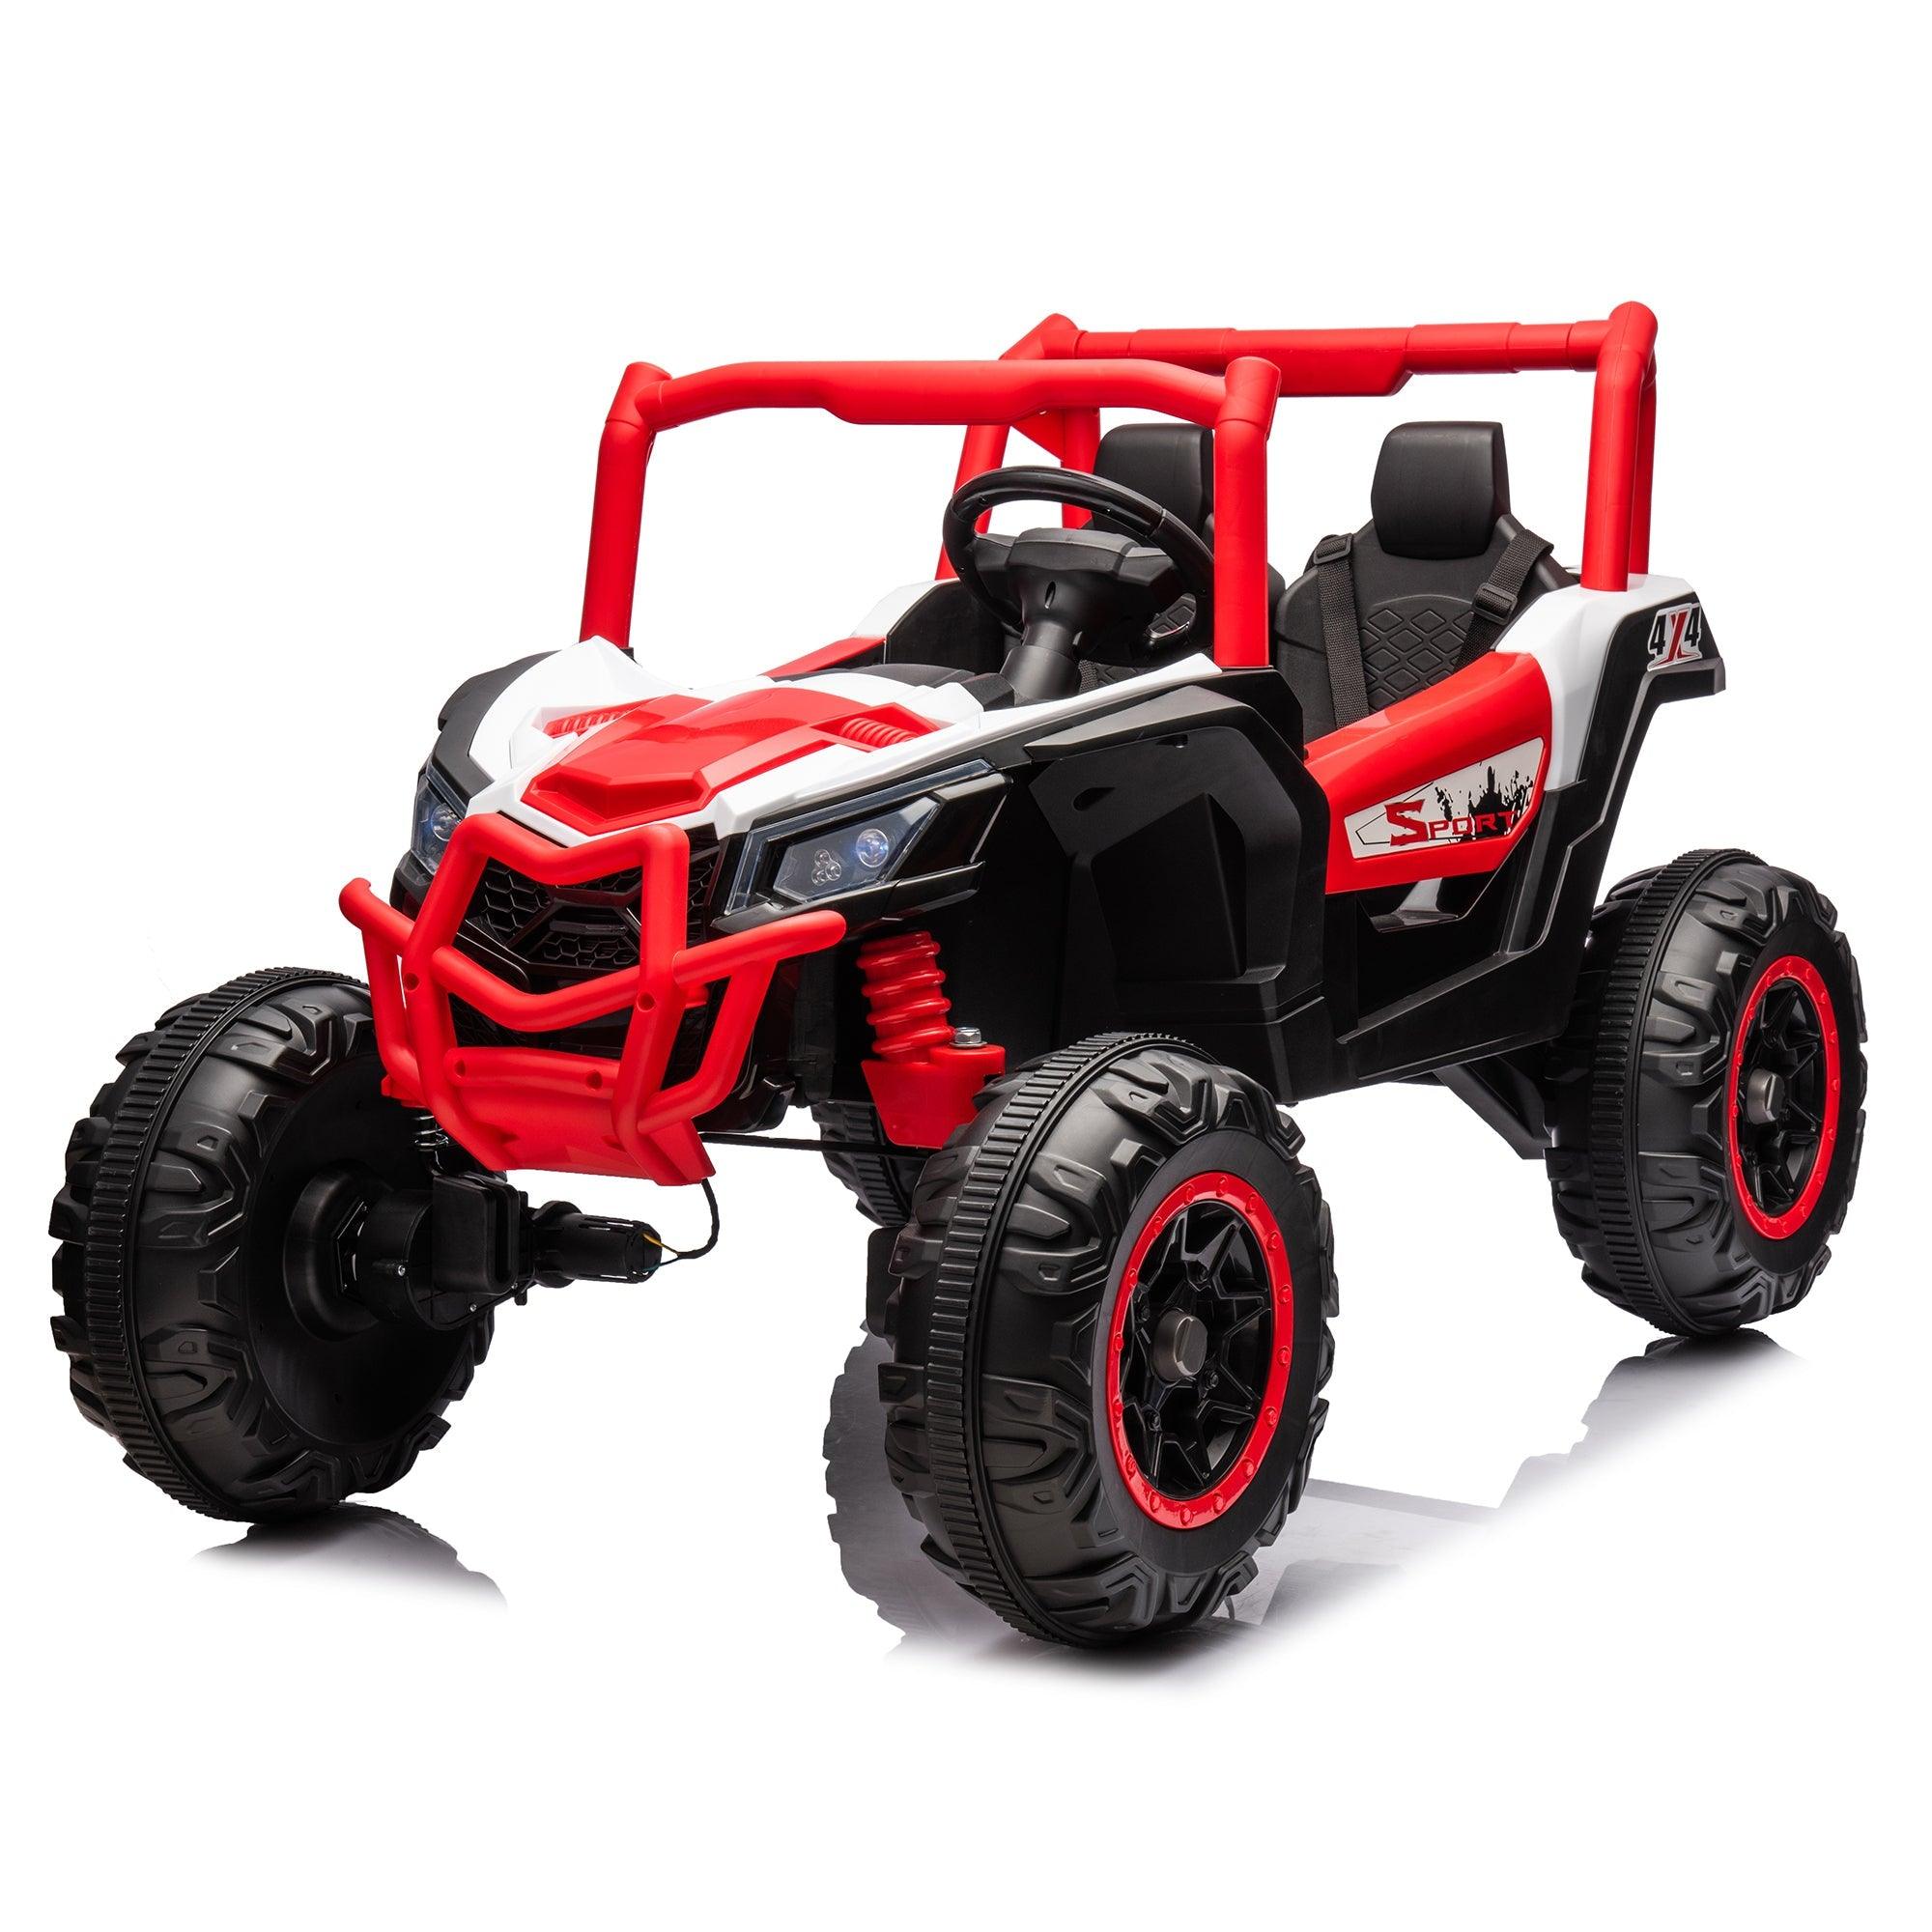 24V Ride On XXL UTV Car For Kids, 2 Seater, Safety Belts, 4X4 Ride On Off-Road Truck, Parent Remote Control, High Low Speed LamCham